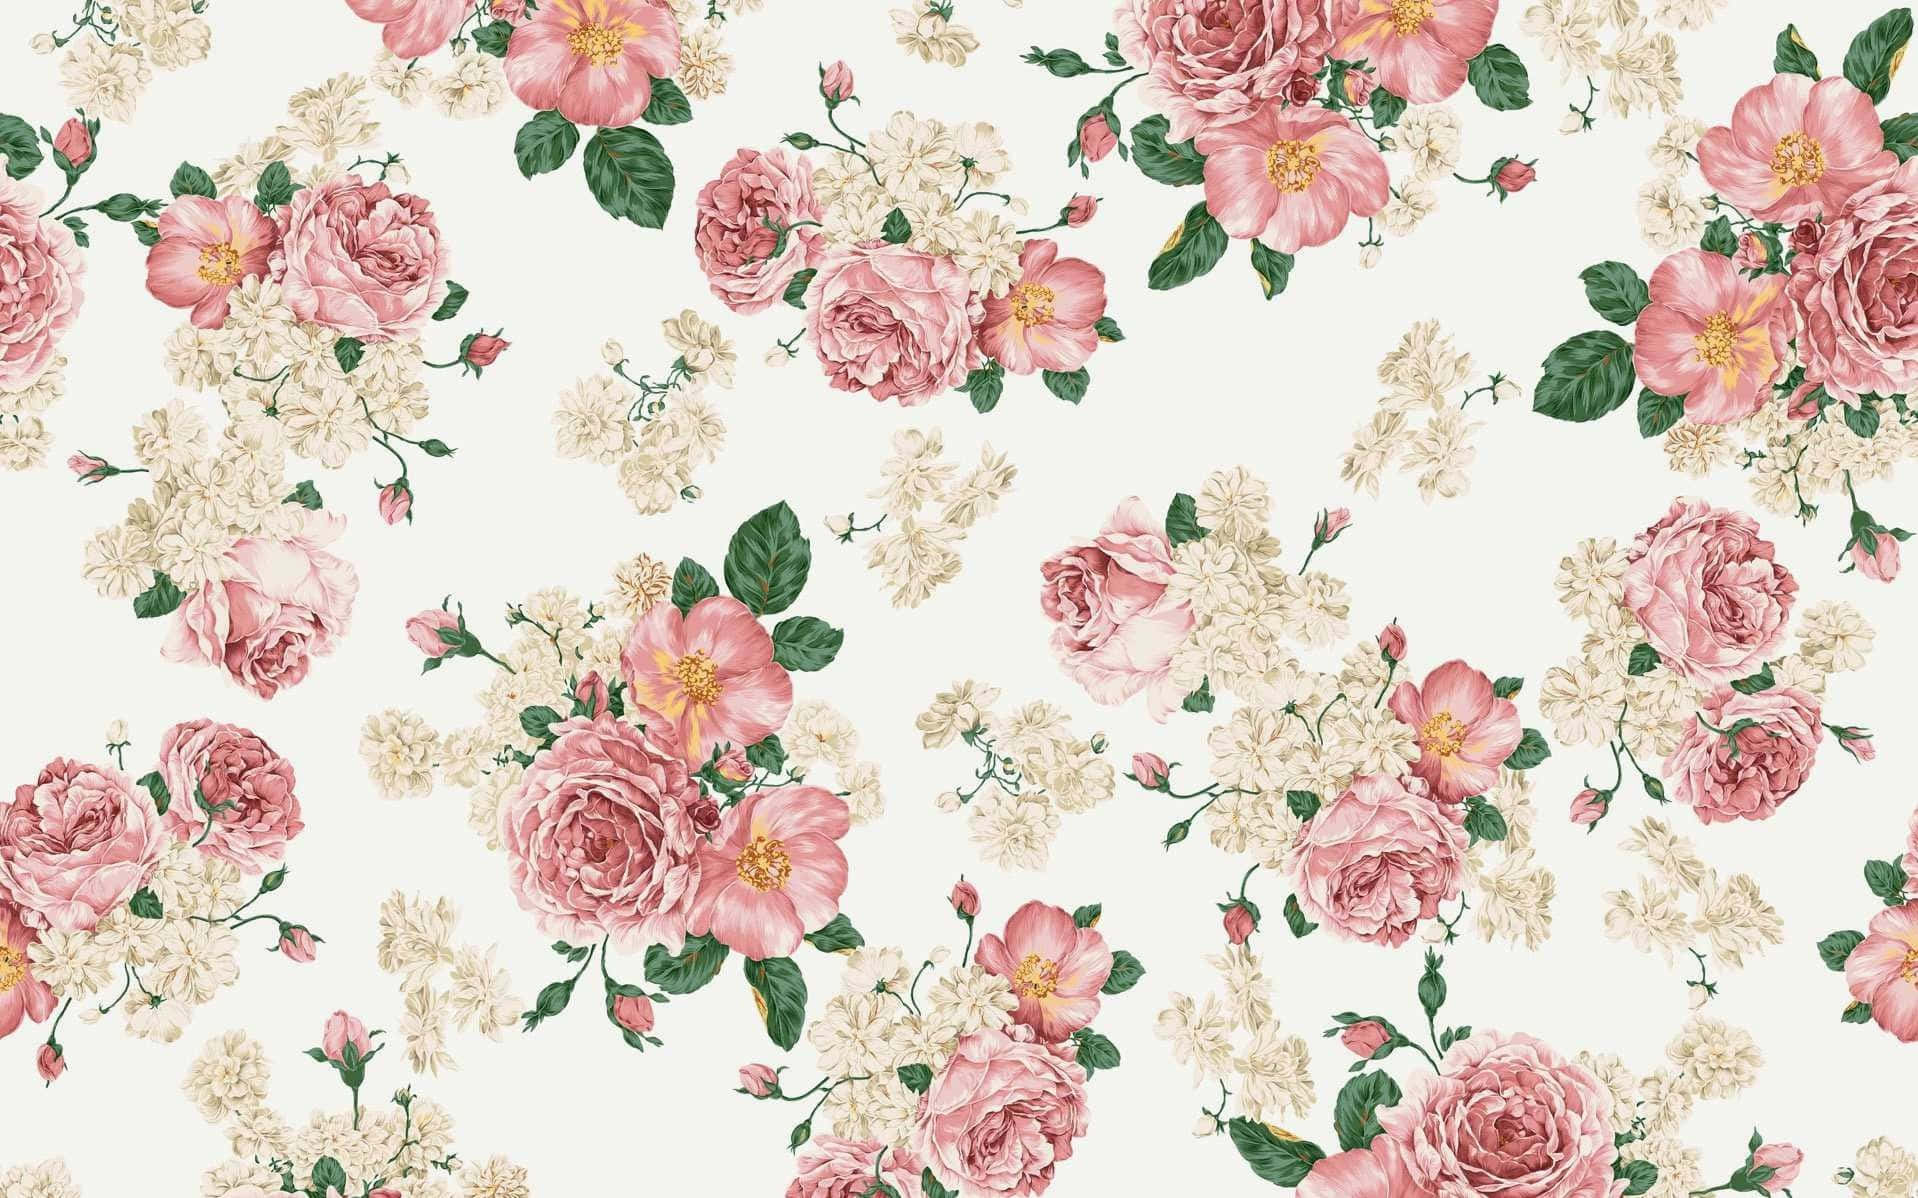 A Pink Floral Wallpaper With White Flowers